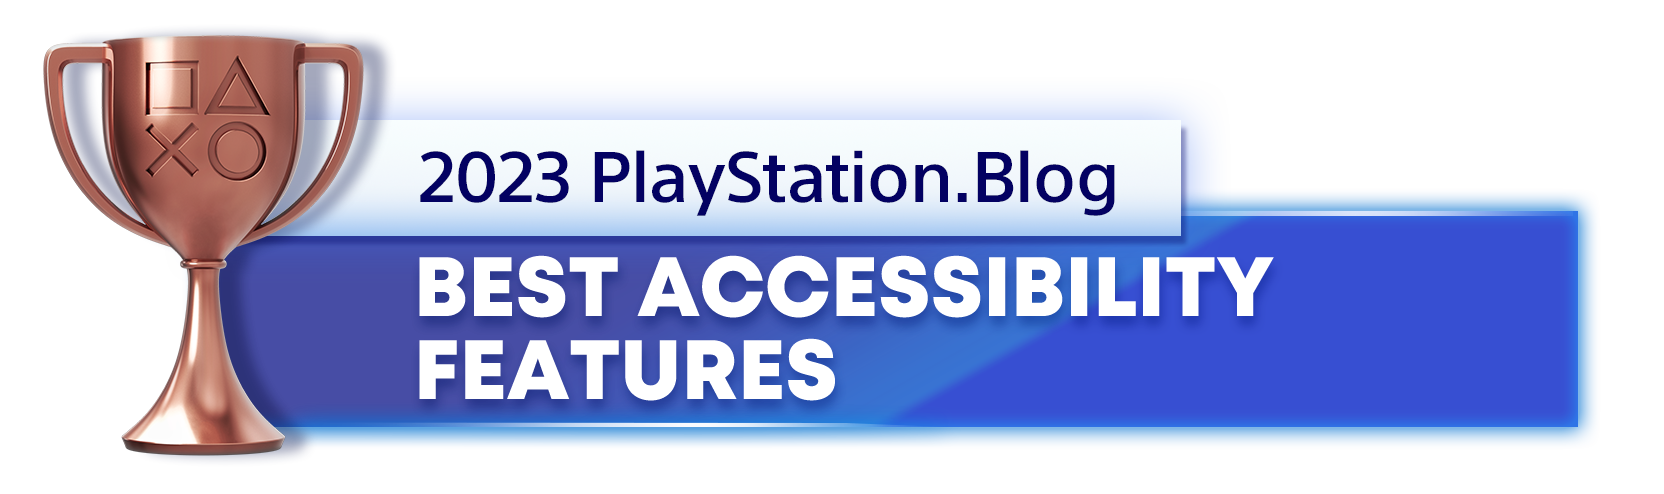  "Bronze Trophy for the 2023 PlayStation Blog Best Accessibility Features Winner"